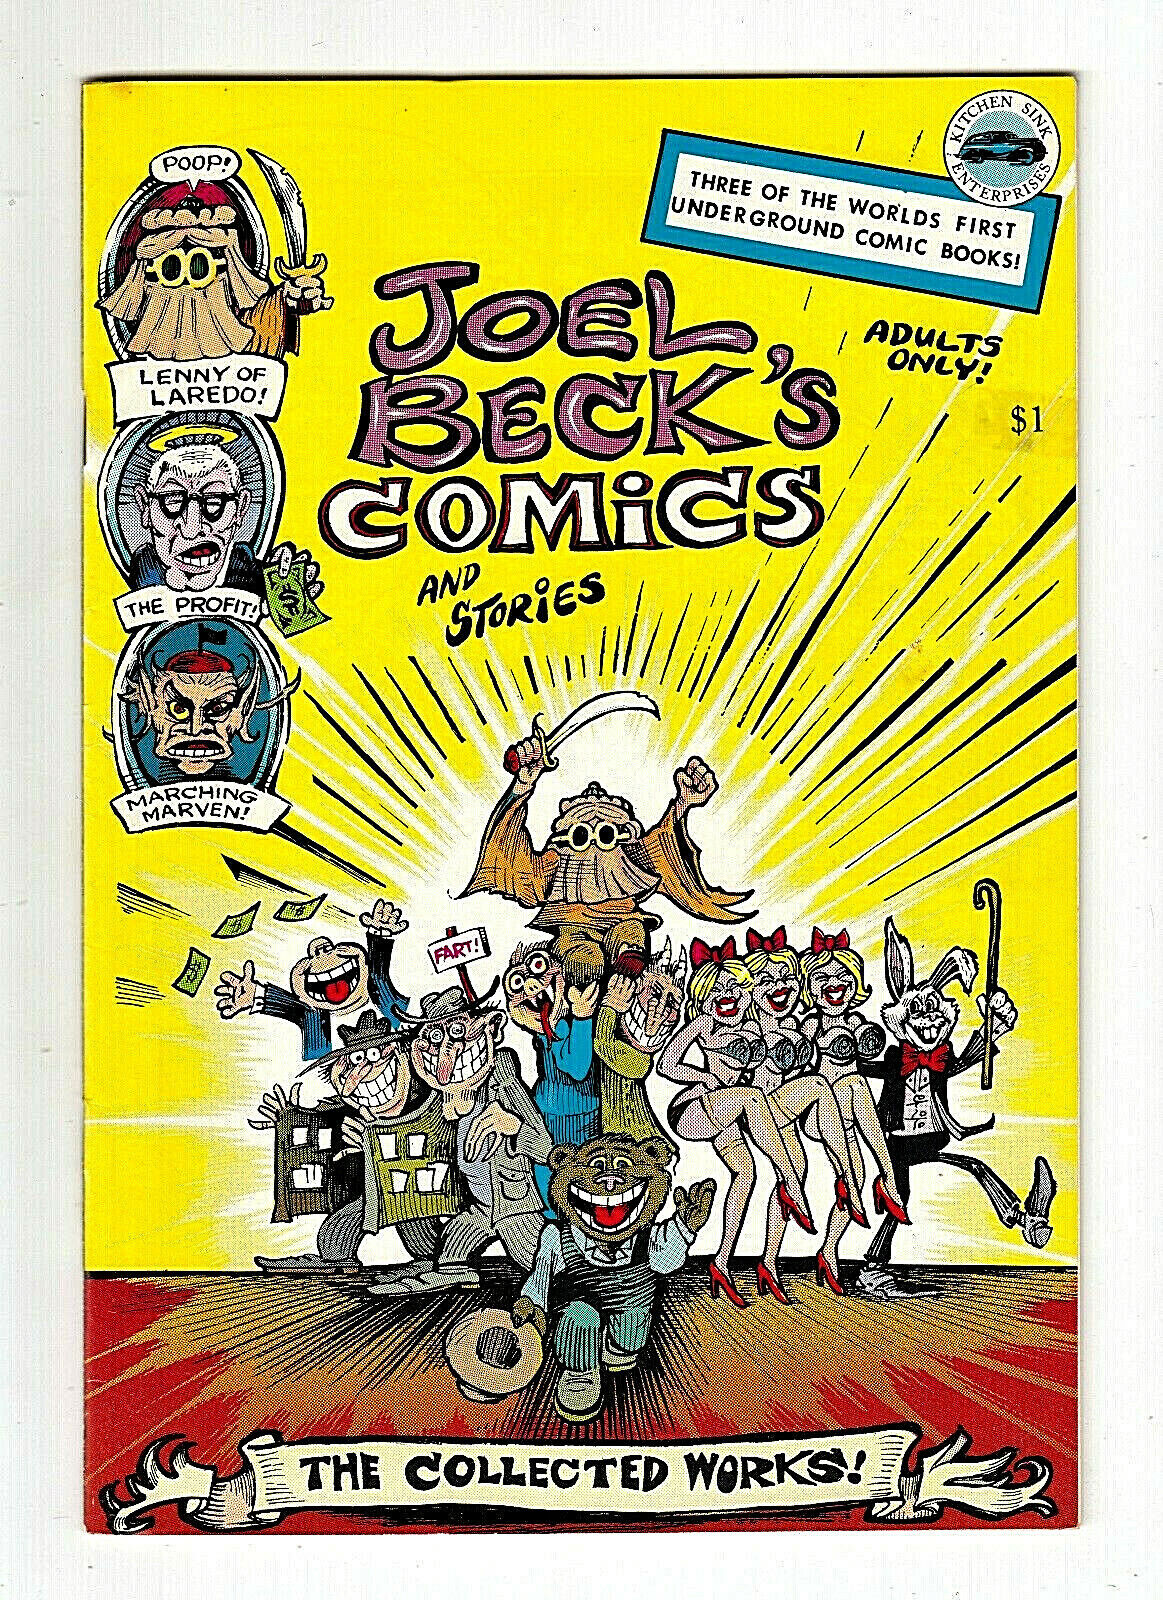 JOEL BECK’S COMICS AND STORIES (Kitchen Sink/January 1977/1st printing) VF (8.0)